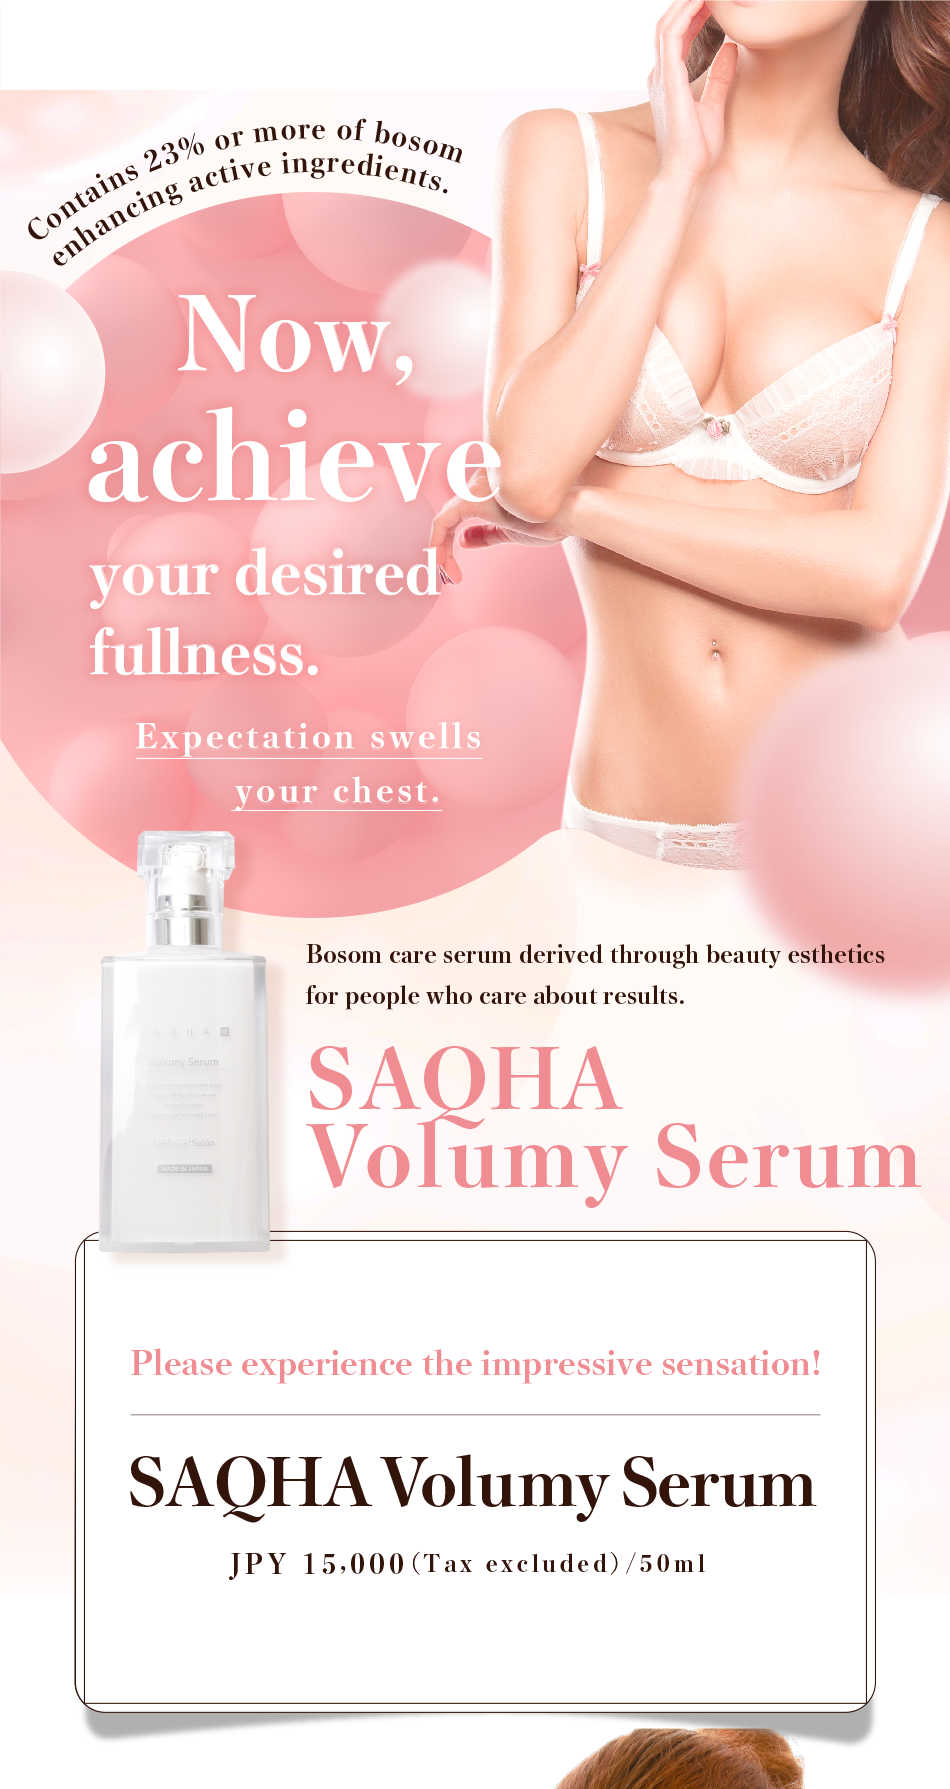 Contains 23% or more of bosom enhancing active ingredients. Now, achieve your desired fullness. Expectation swells your chest. Bosom care serum derived through beauty esthetics for people who care about results. Please experience the impressive sensation! SAQHA Volumey Serum